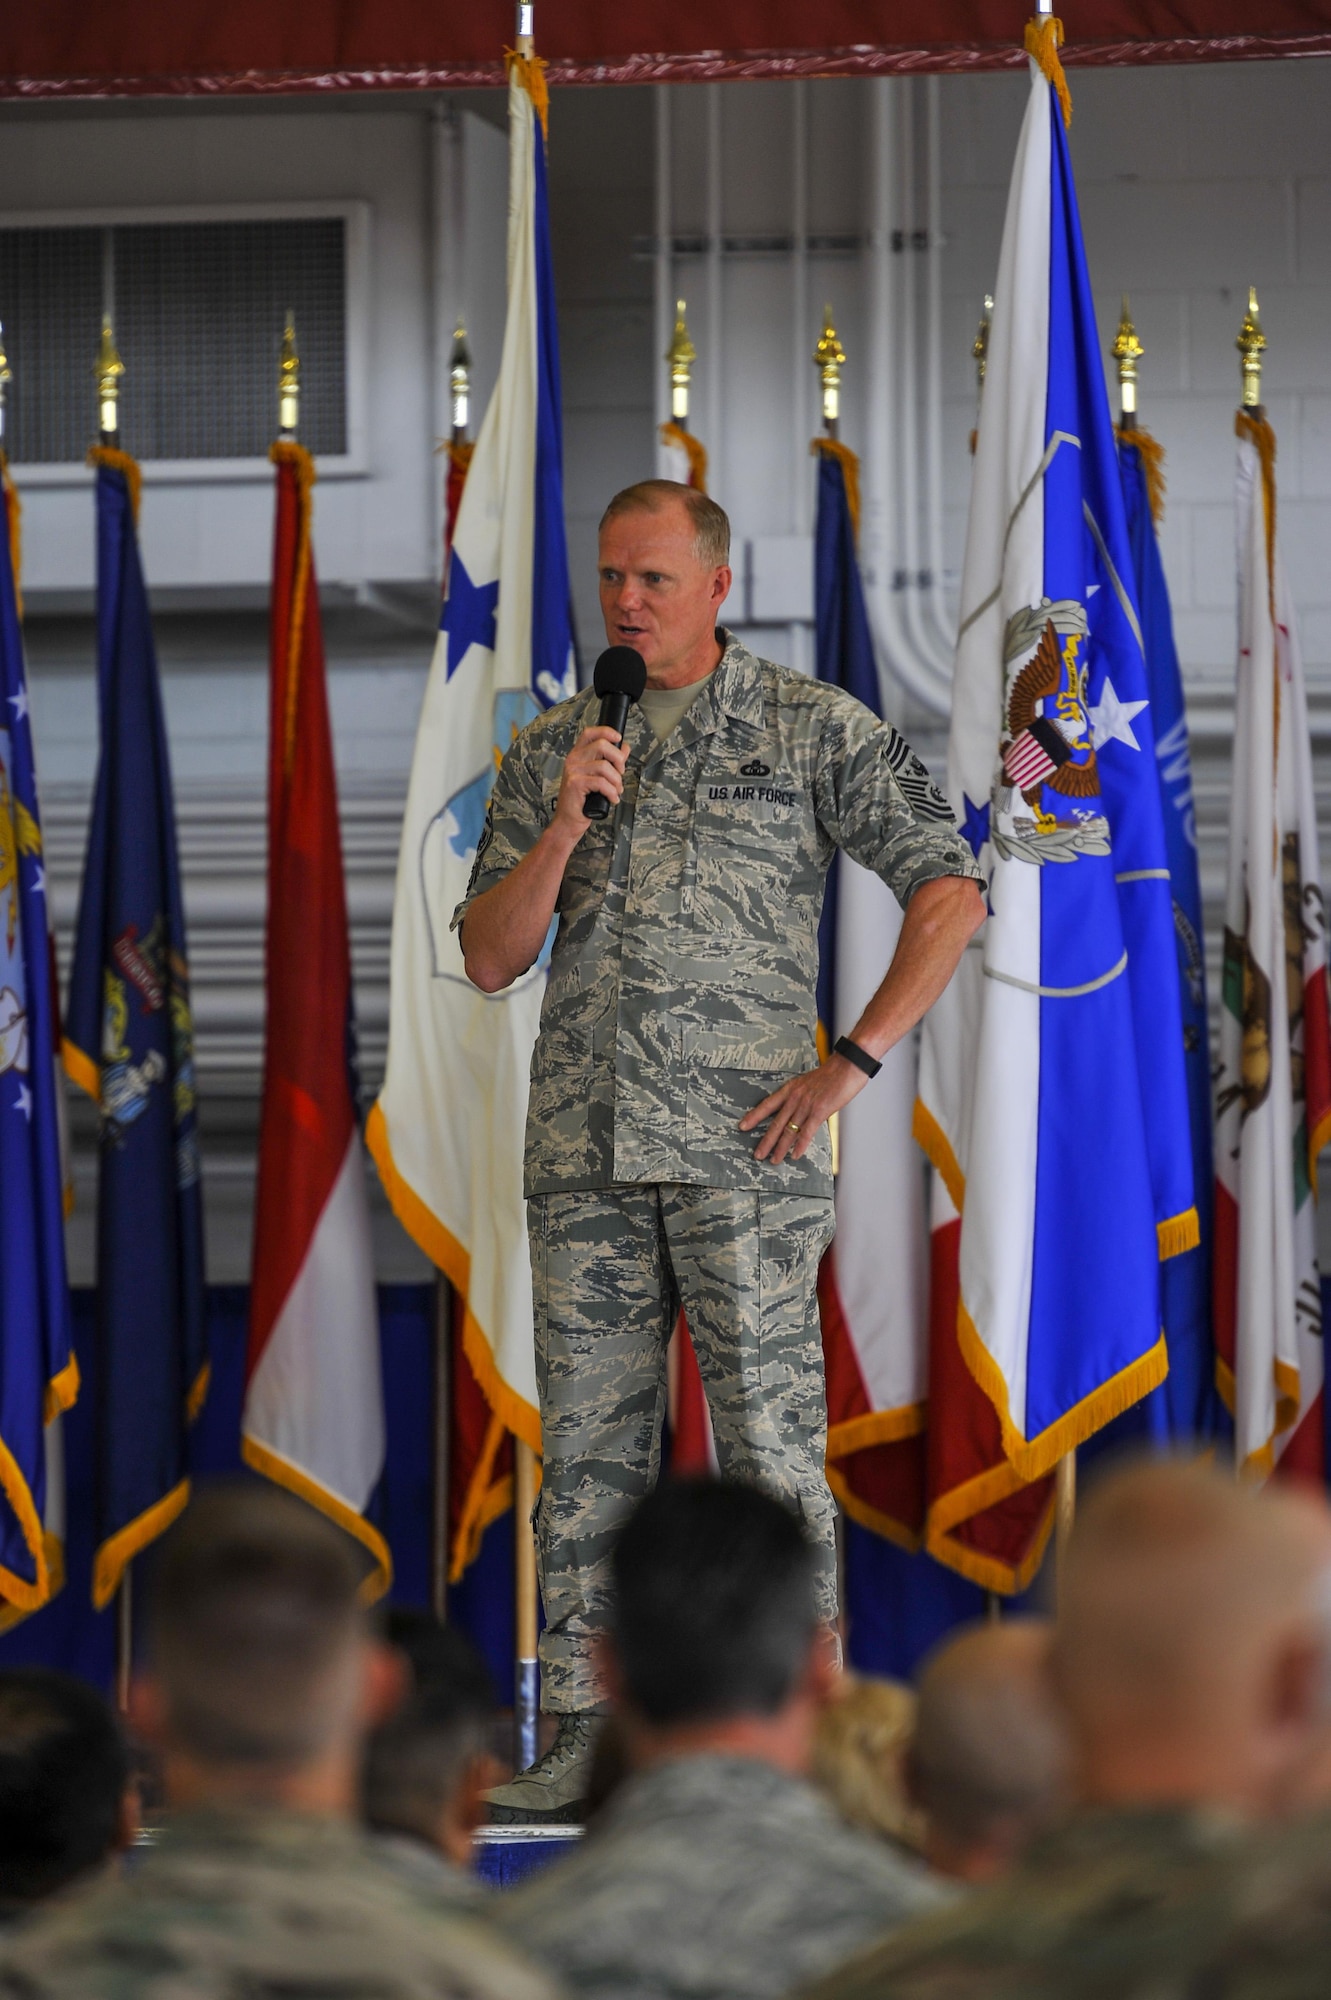 Chief Master Sgt. of the Air Force James A. Cody speaks to Airmen during an all call at Freedom Hangar on Hurlburt Field, Fla., Sept. 30, 2015. (U.S. Air Force photo by Airman Kai White)